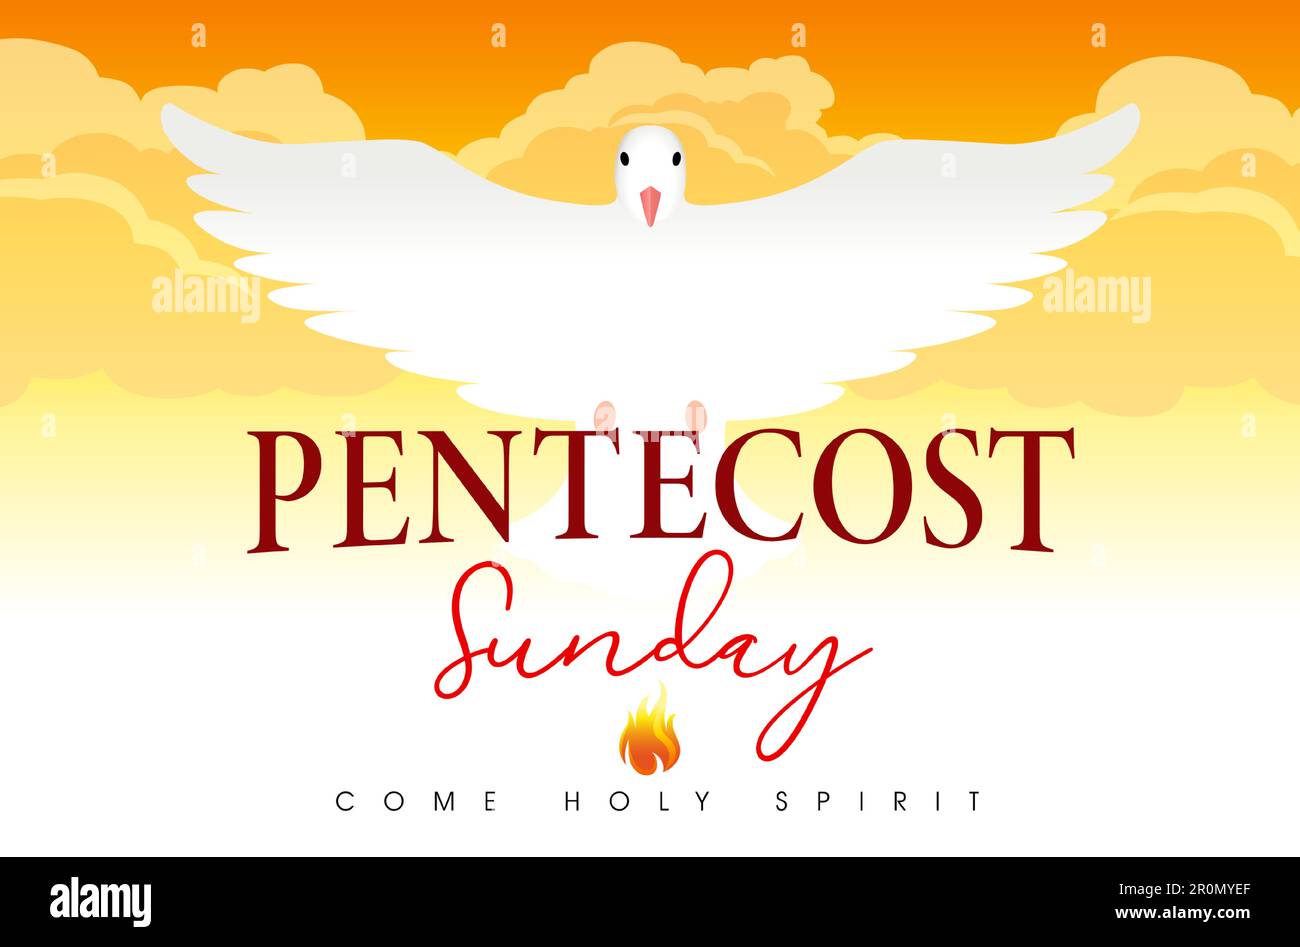 Pentecost Sunday, bulletin banner concept. Come Holy Spirit, flying dove in sky, design for poster or worship invitation. The Outpouring of the Spirit Stock Vector